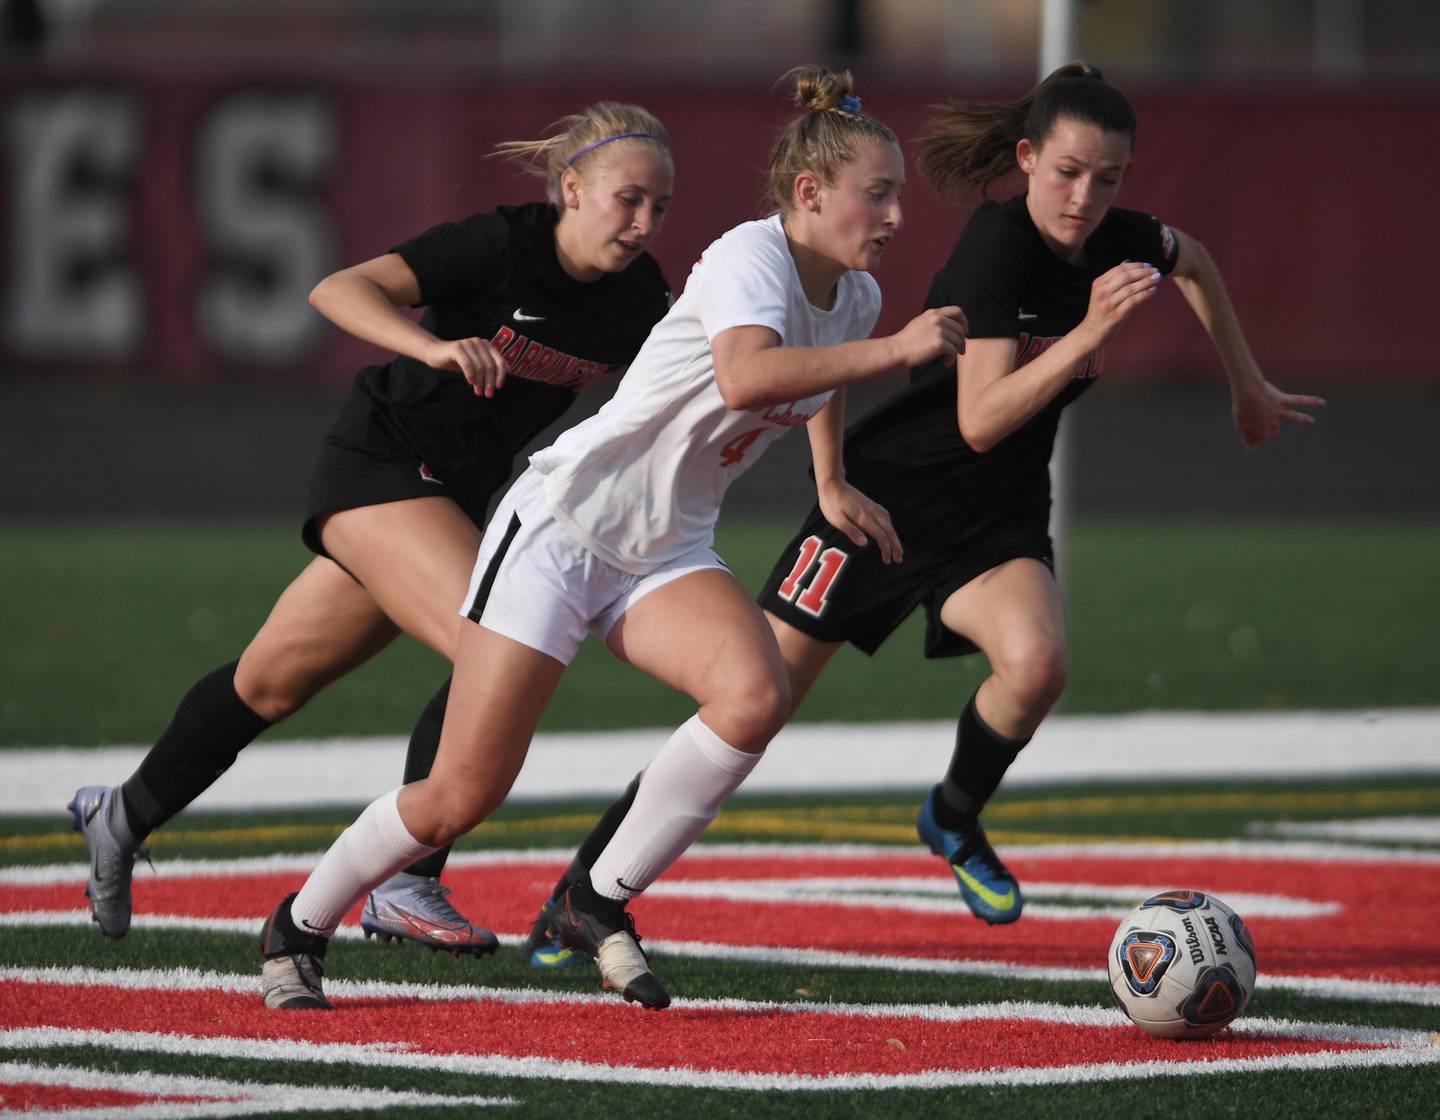 John Starks/jstarks@dailyherald.com
St. Charles East’s Grace Williams controls the ball against Barrington’s Gracie Stagnito, left, and Caitlin Paul at the Class 3A Barrington girls soccer supersectional on Tuesday, May 31, 2022.